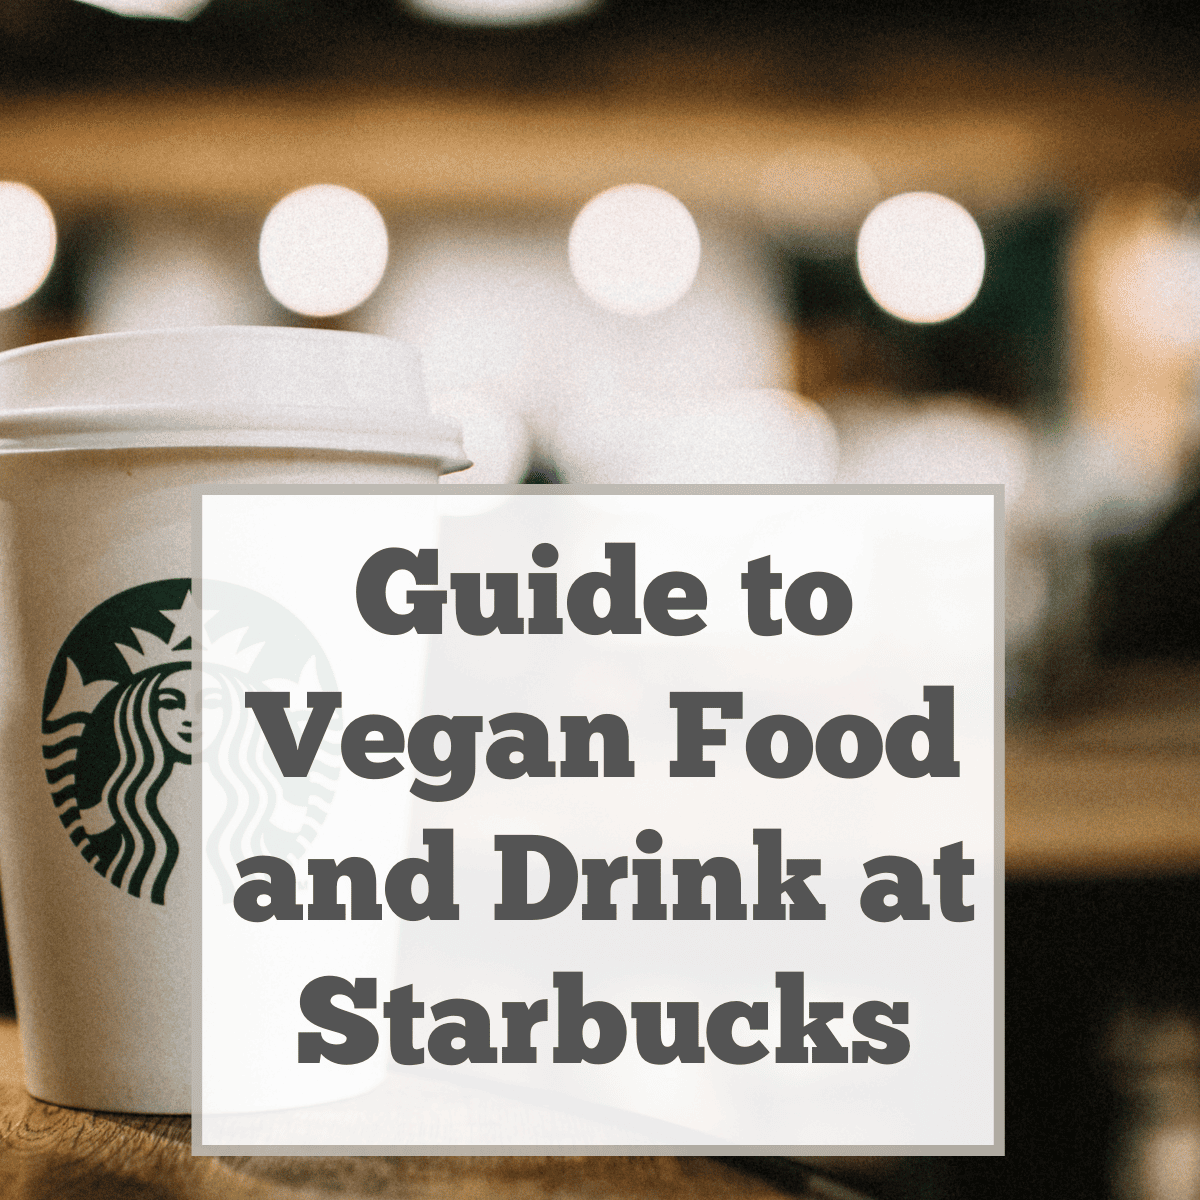 Starbucks guide featured image.